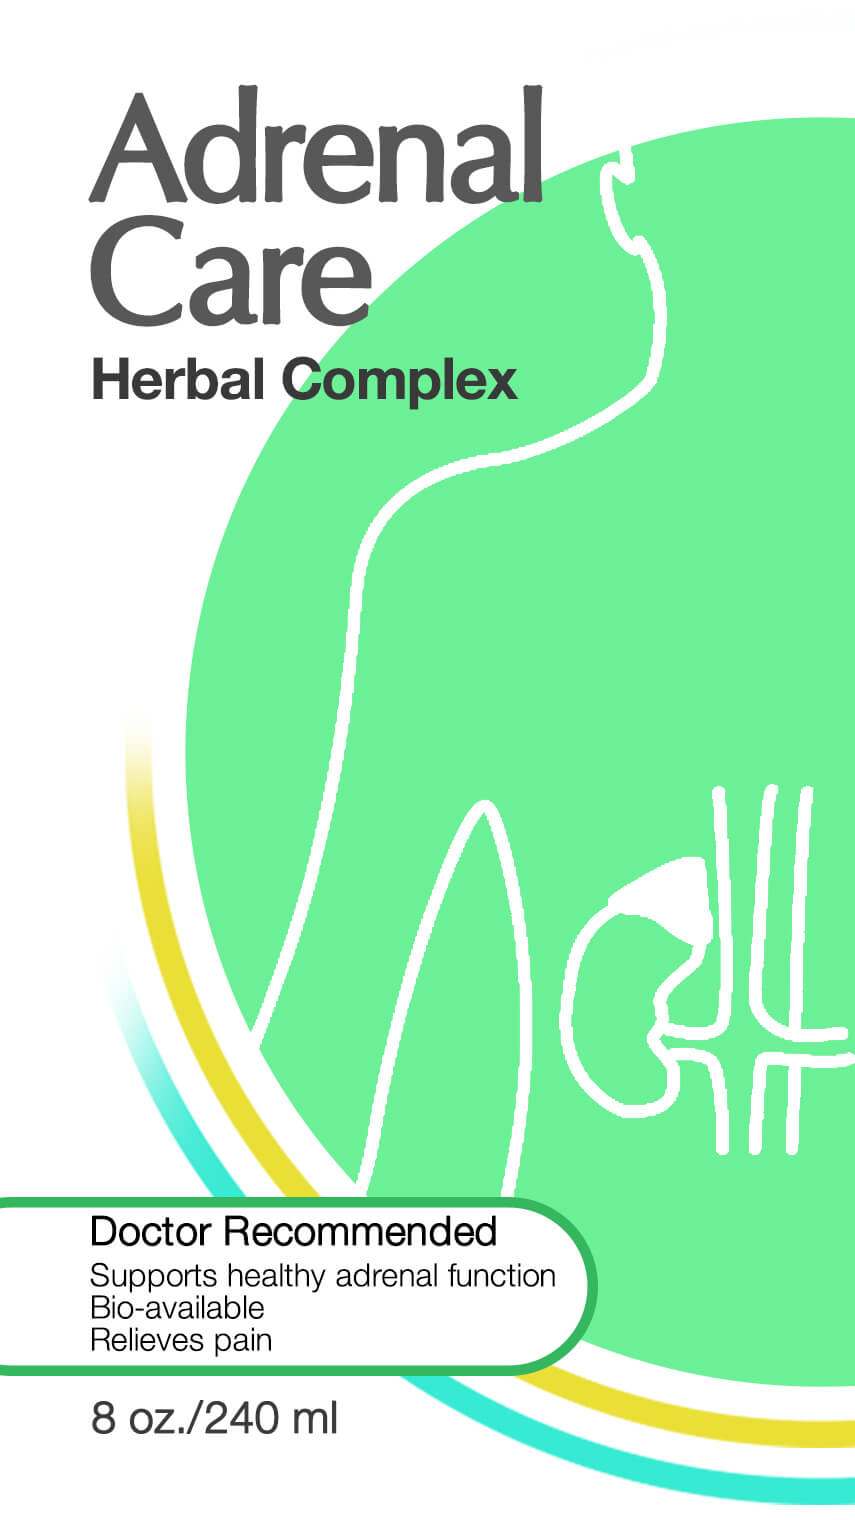 Adrenal Care Herbal Complex Front Label